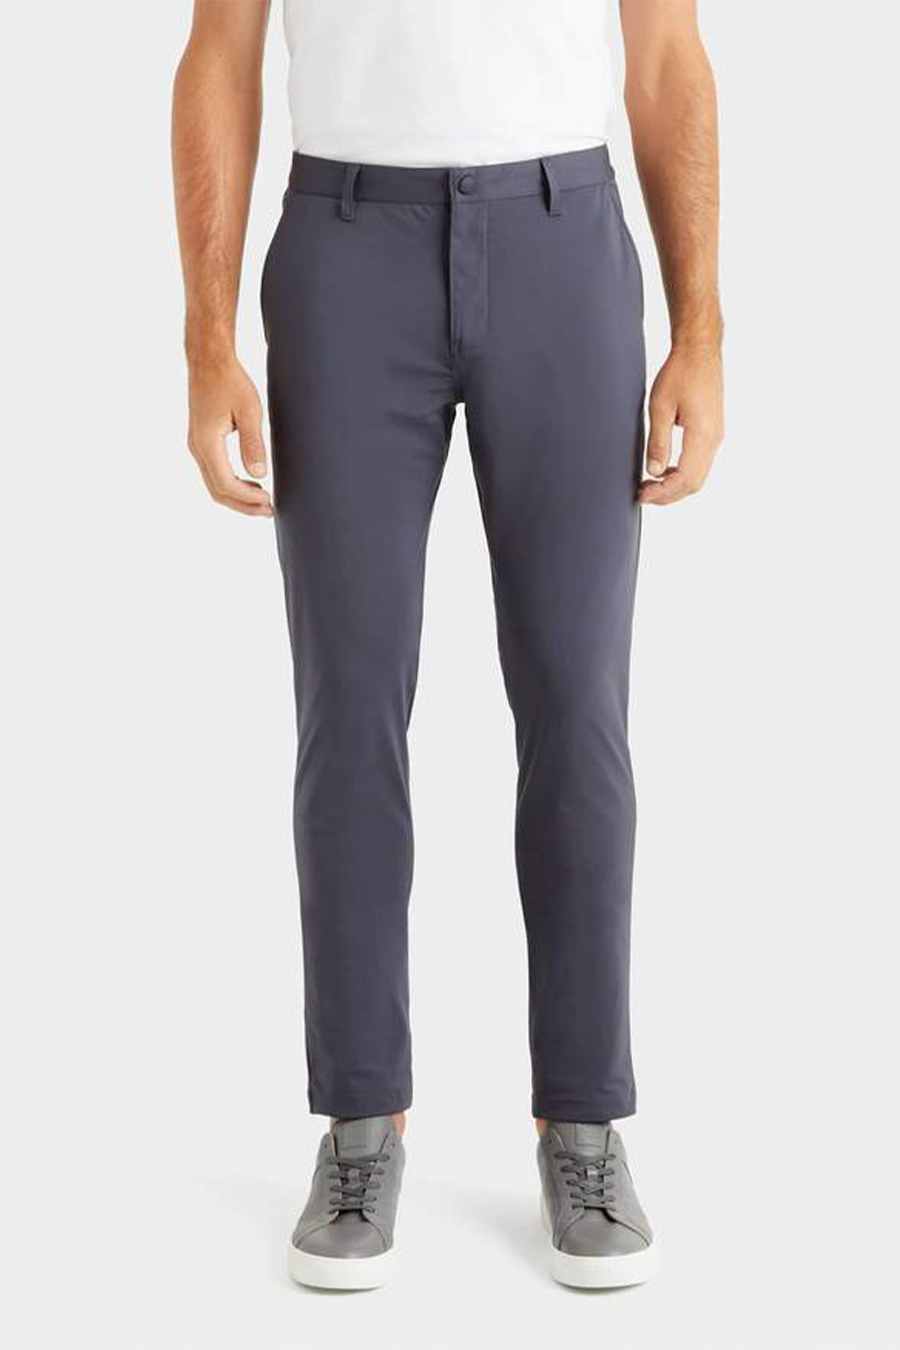 Commuter Pant Slim | Iron - Main Image Number 1 of 2